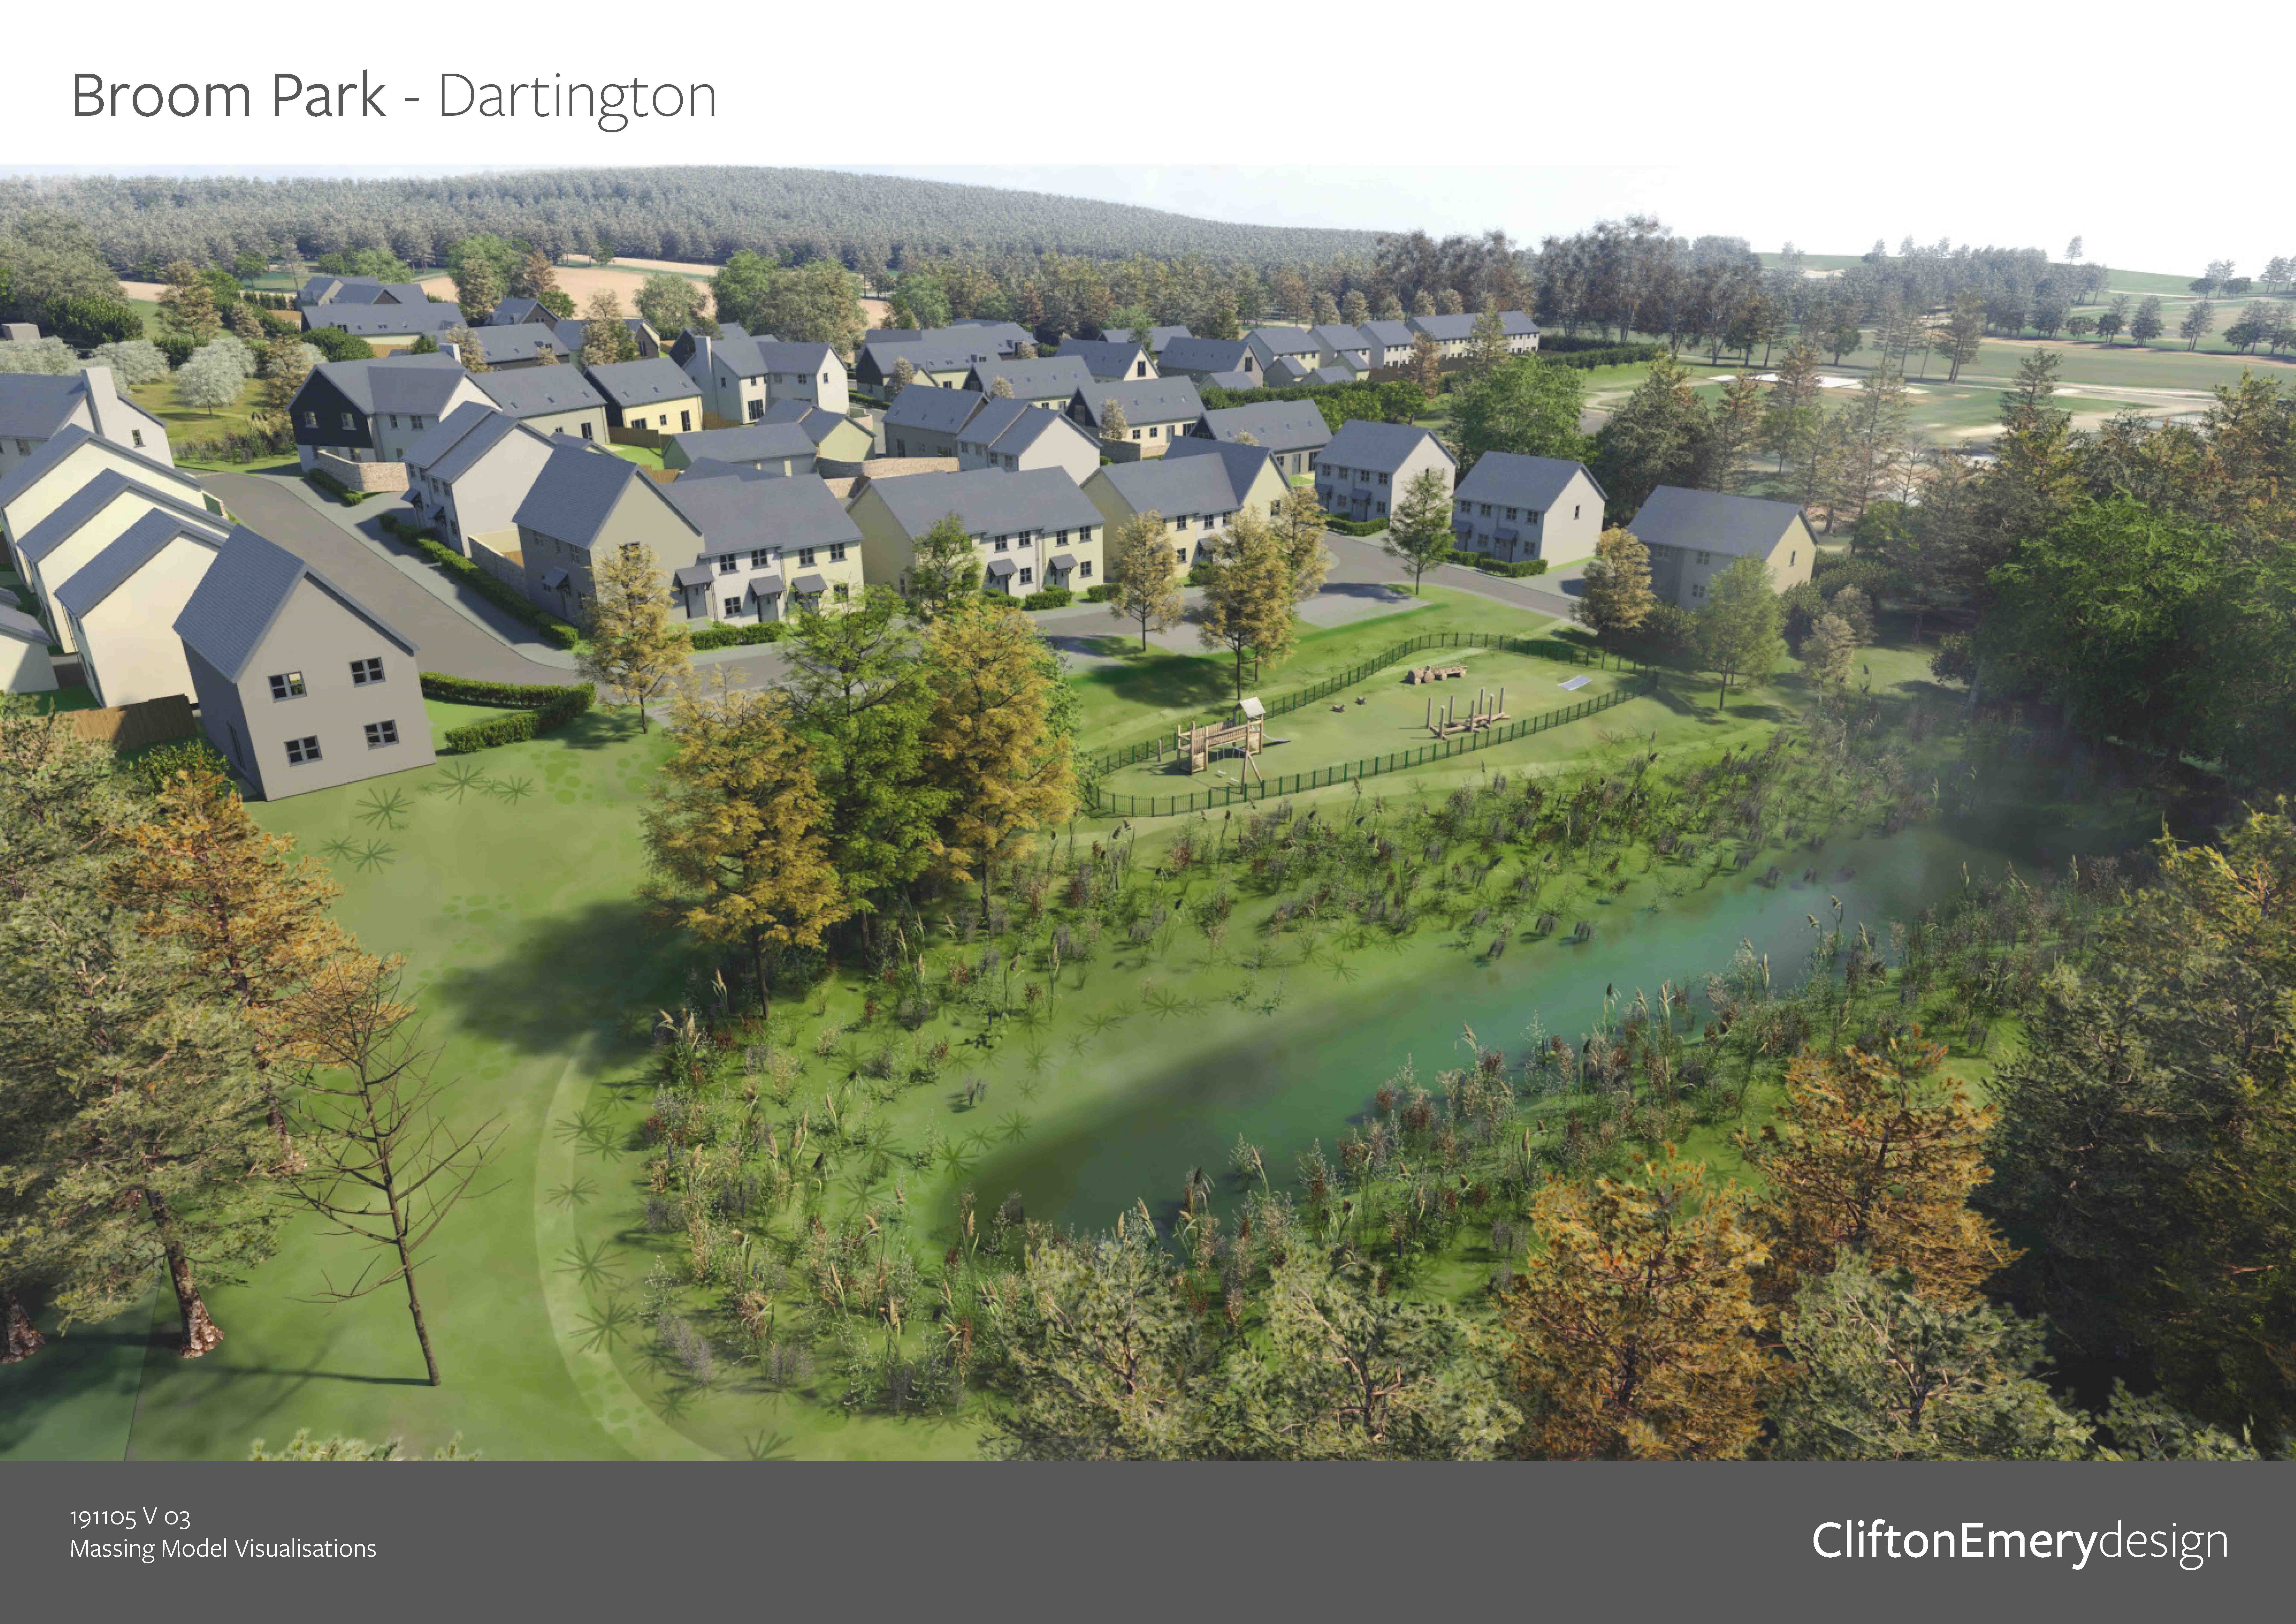 Baker Estates secures planning consent for two new housing developments in Dartington